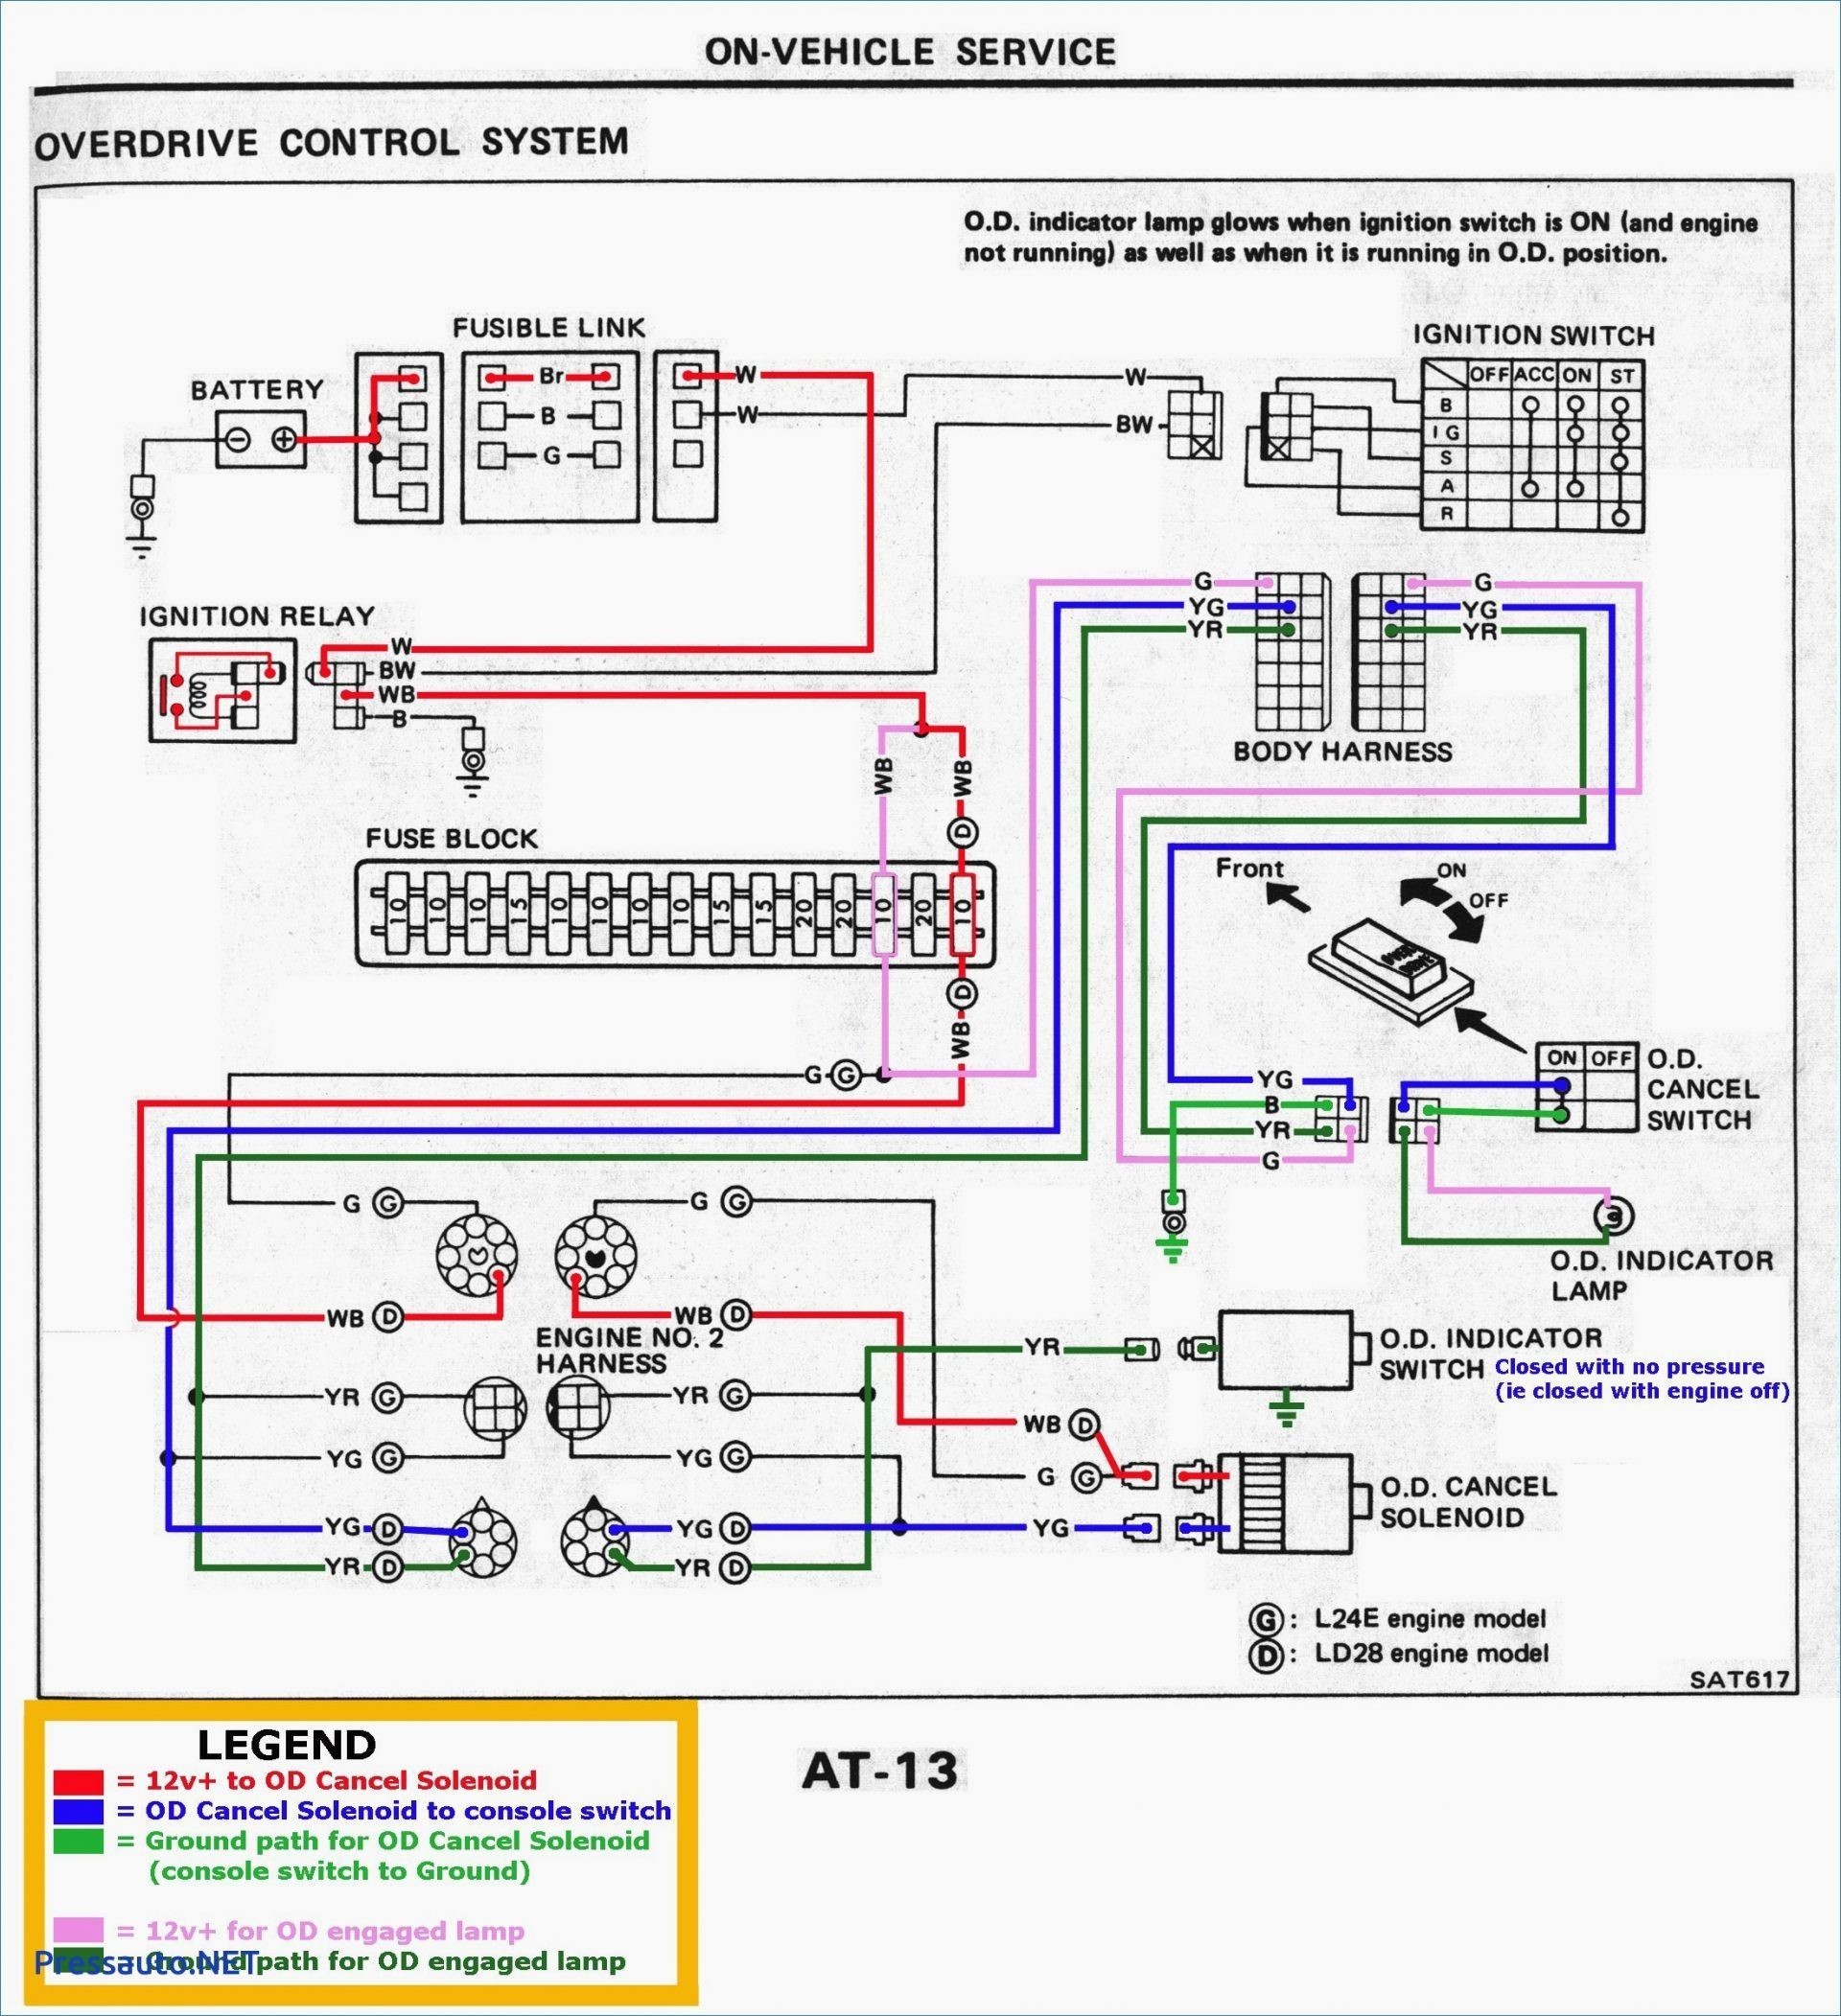 Tail Light Wiring Diagram for 2000 F350 â¦diagram Basedâ¦ Chevy Truck Tail Light Wiring Diagram Of Tail Light Wiring Diagram for 2000 F350